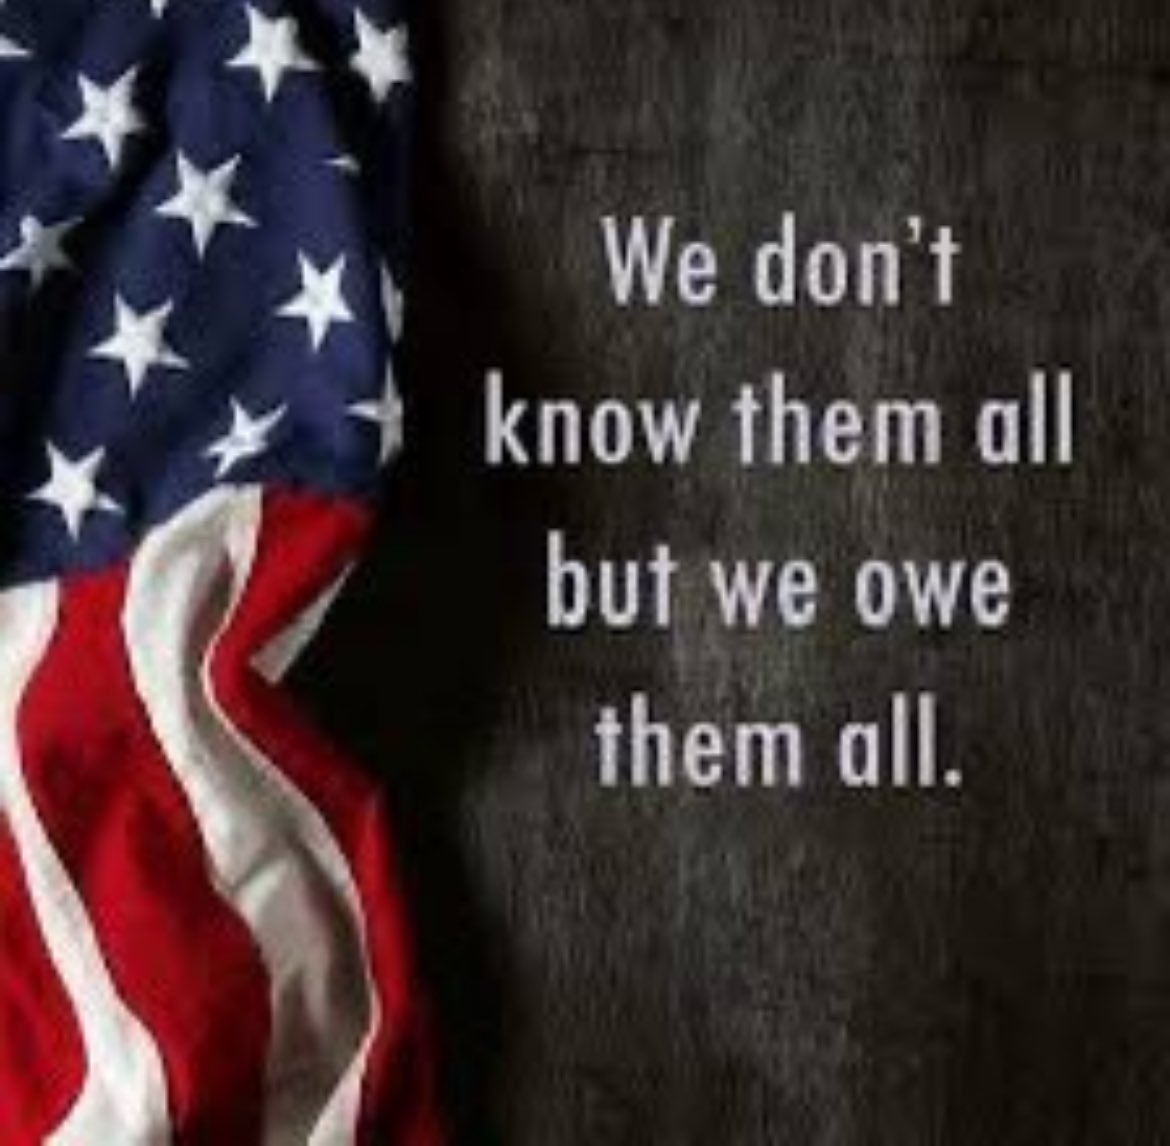 Today is the day…to give thanks to those whose gave their lives for our freedom. #todayistheday #MemorialDay #MondayMotivation ❤️🤍💙🇺🇸